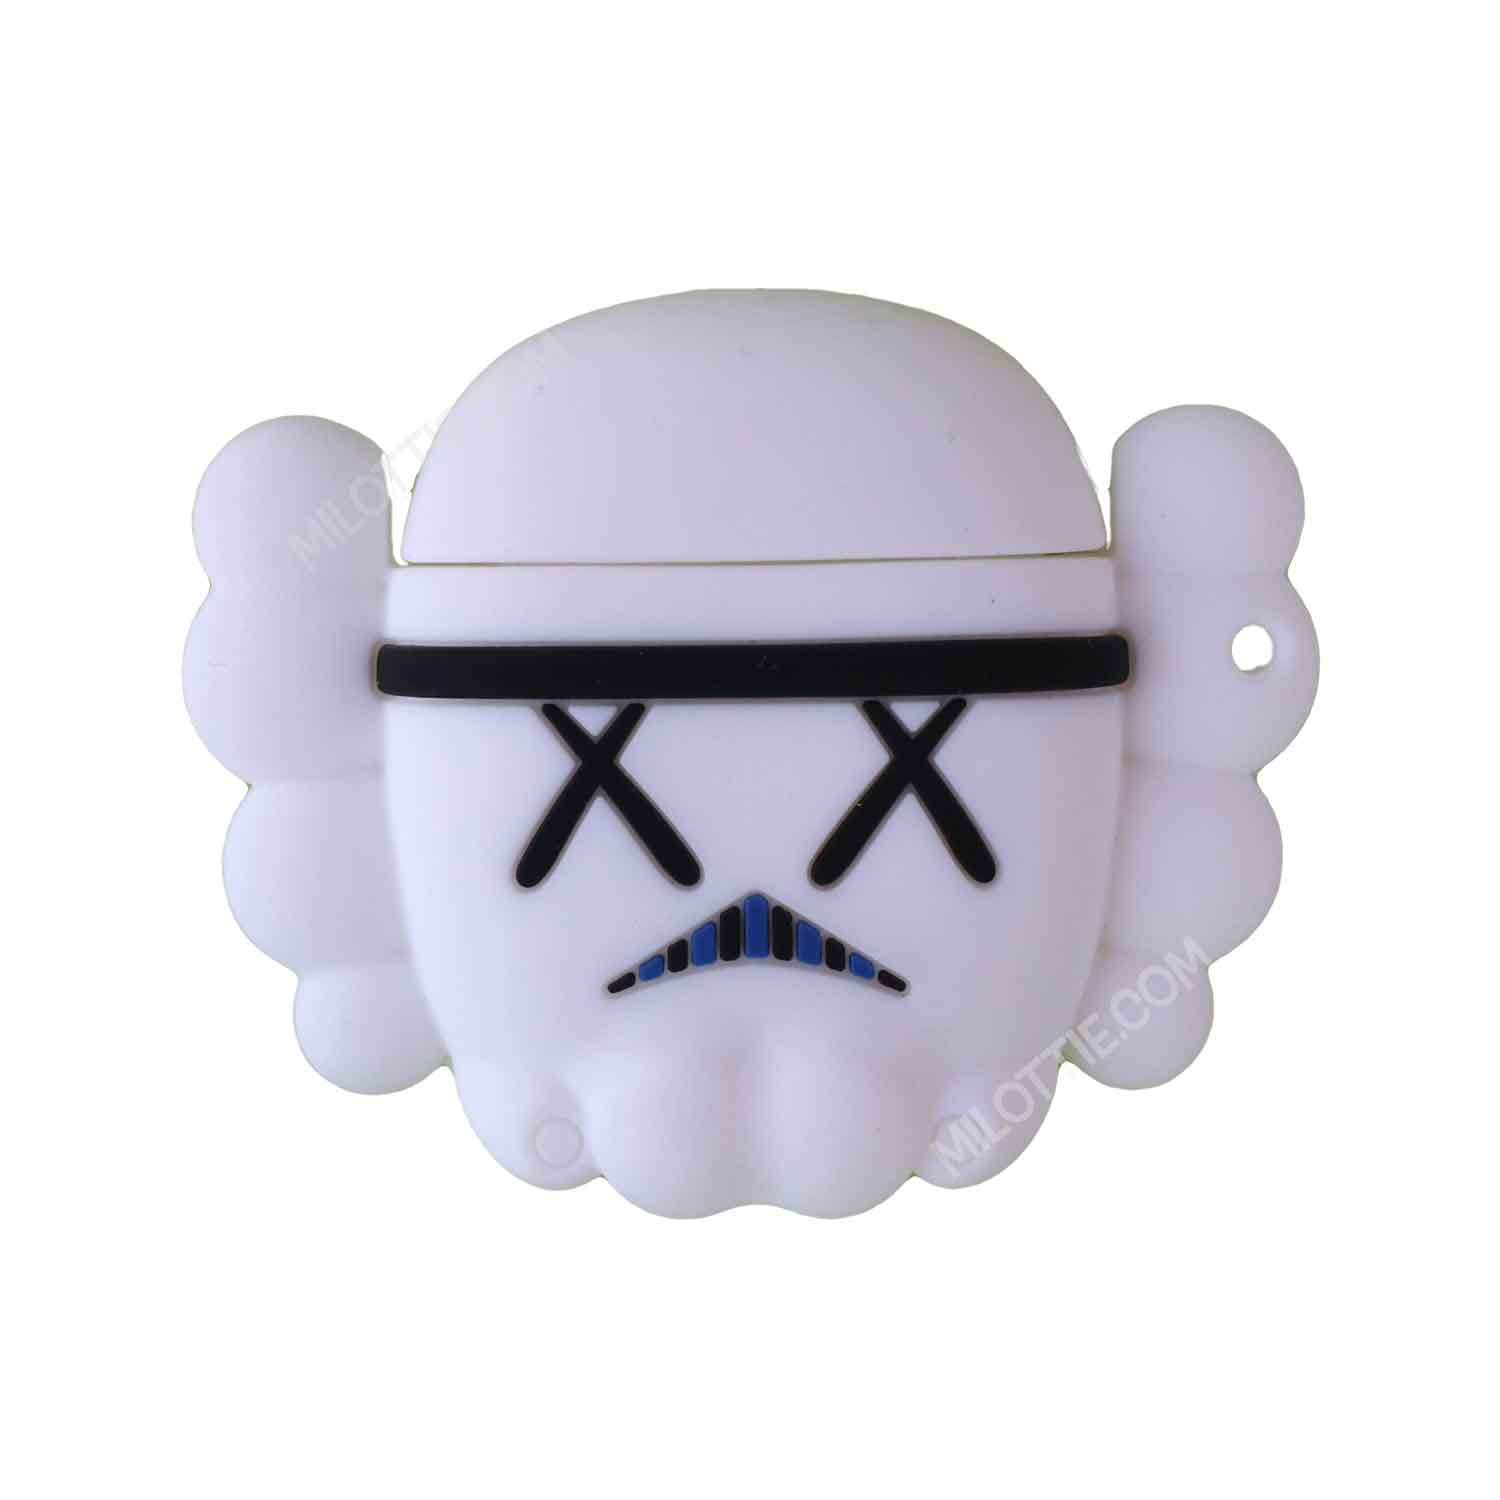 Kaws Storm Trooper Star Wars Airpods Case